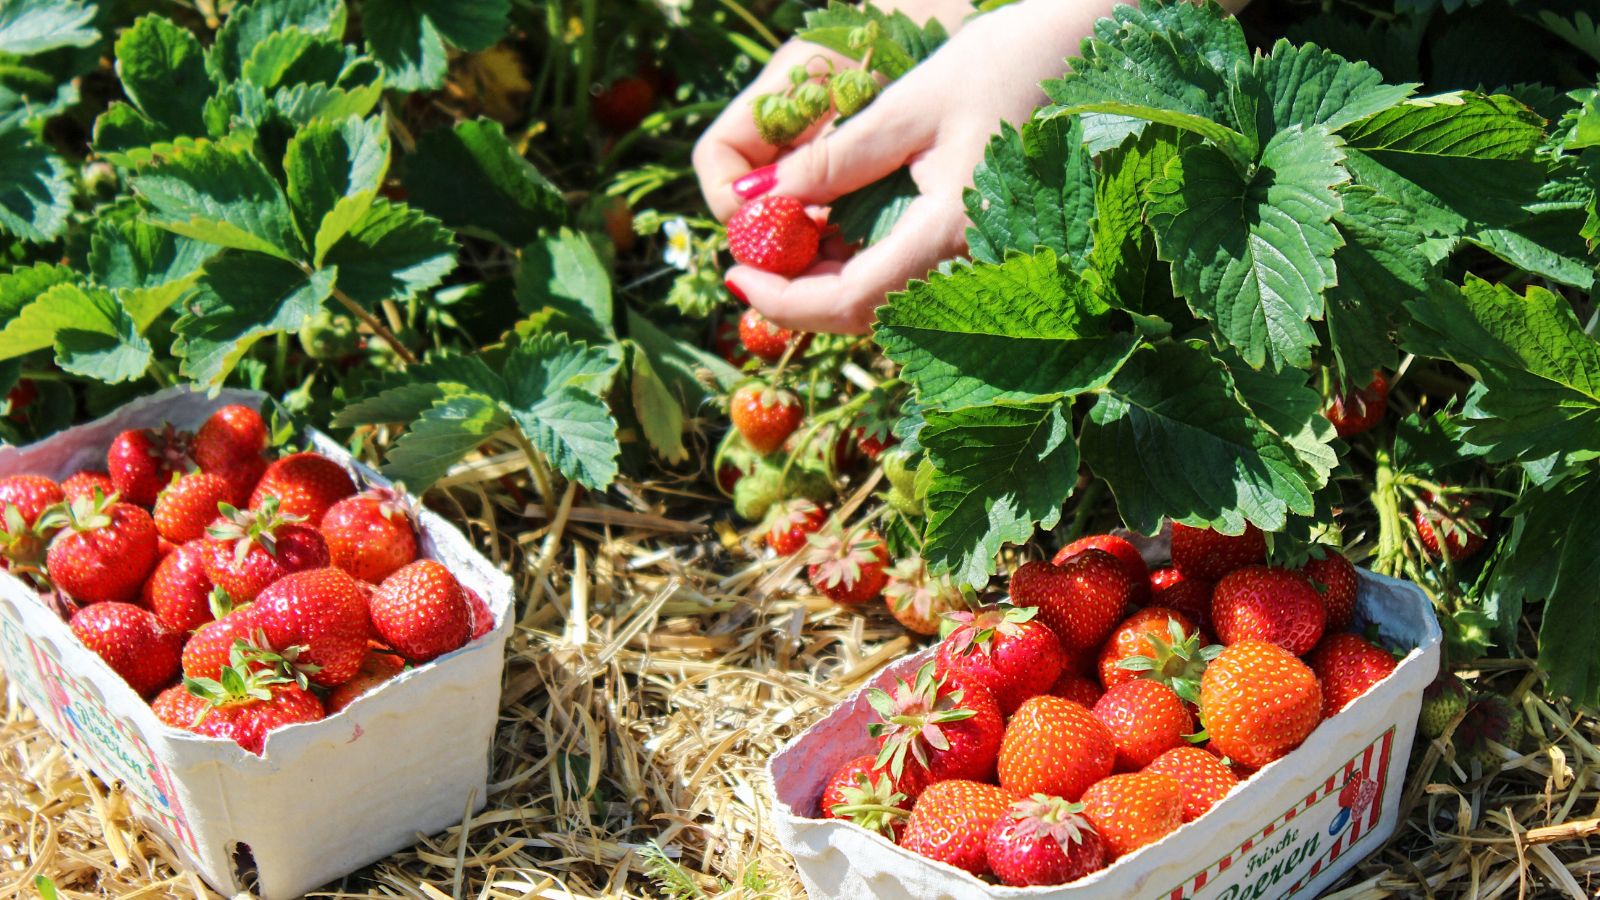 Woman harvesting fresh strawberries and placing them inside a basket.